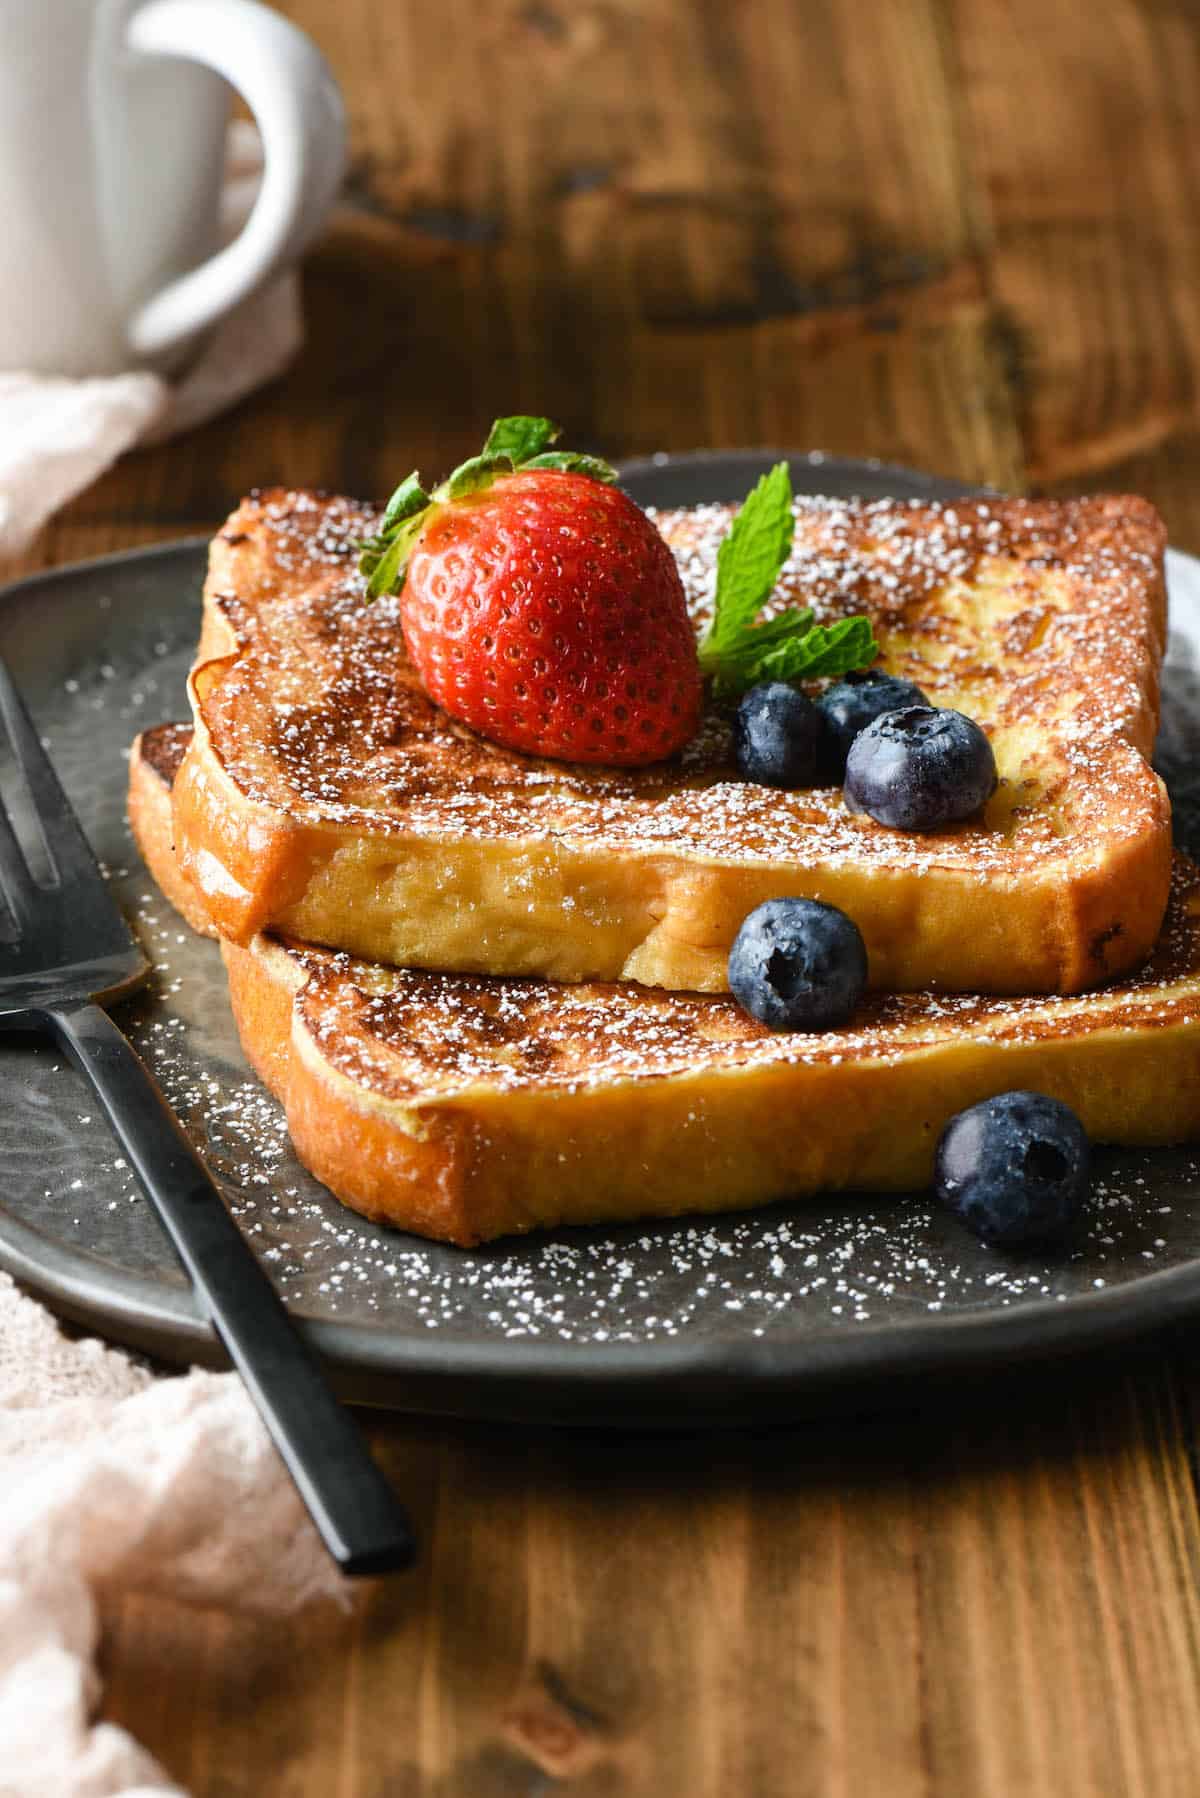 This Brioche French Toast is made with a secret ingredient! This easy-to-follow recipe makes a simple and sweet breakfast treat the whole family will love. | foxeslovelemons.com